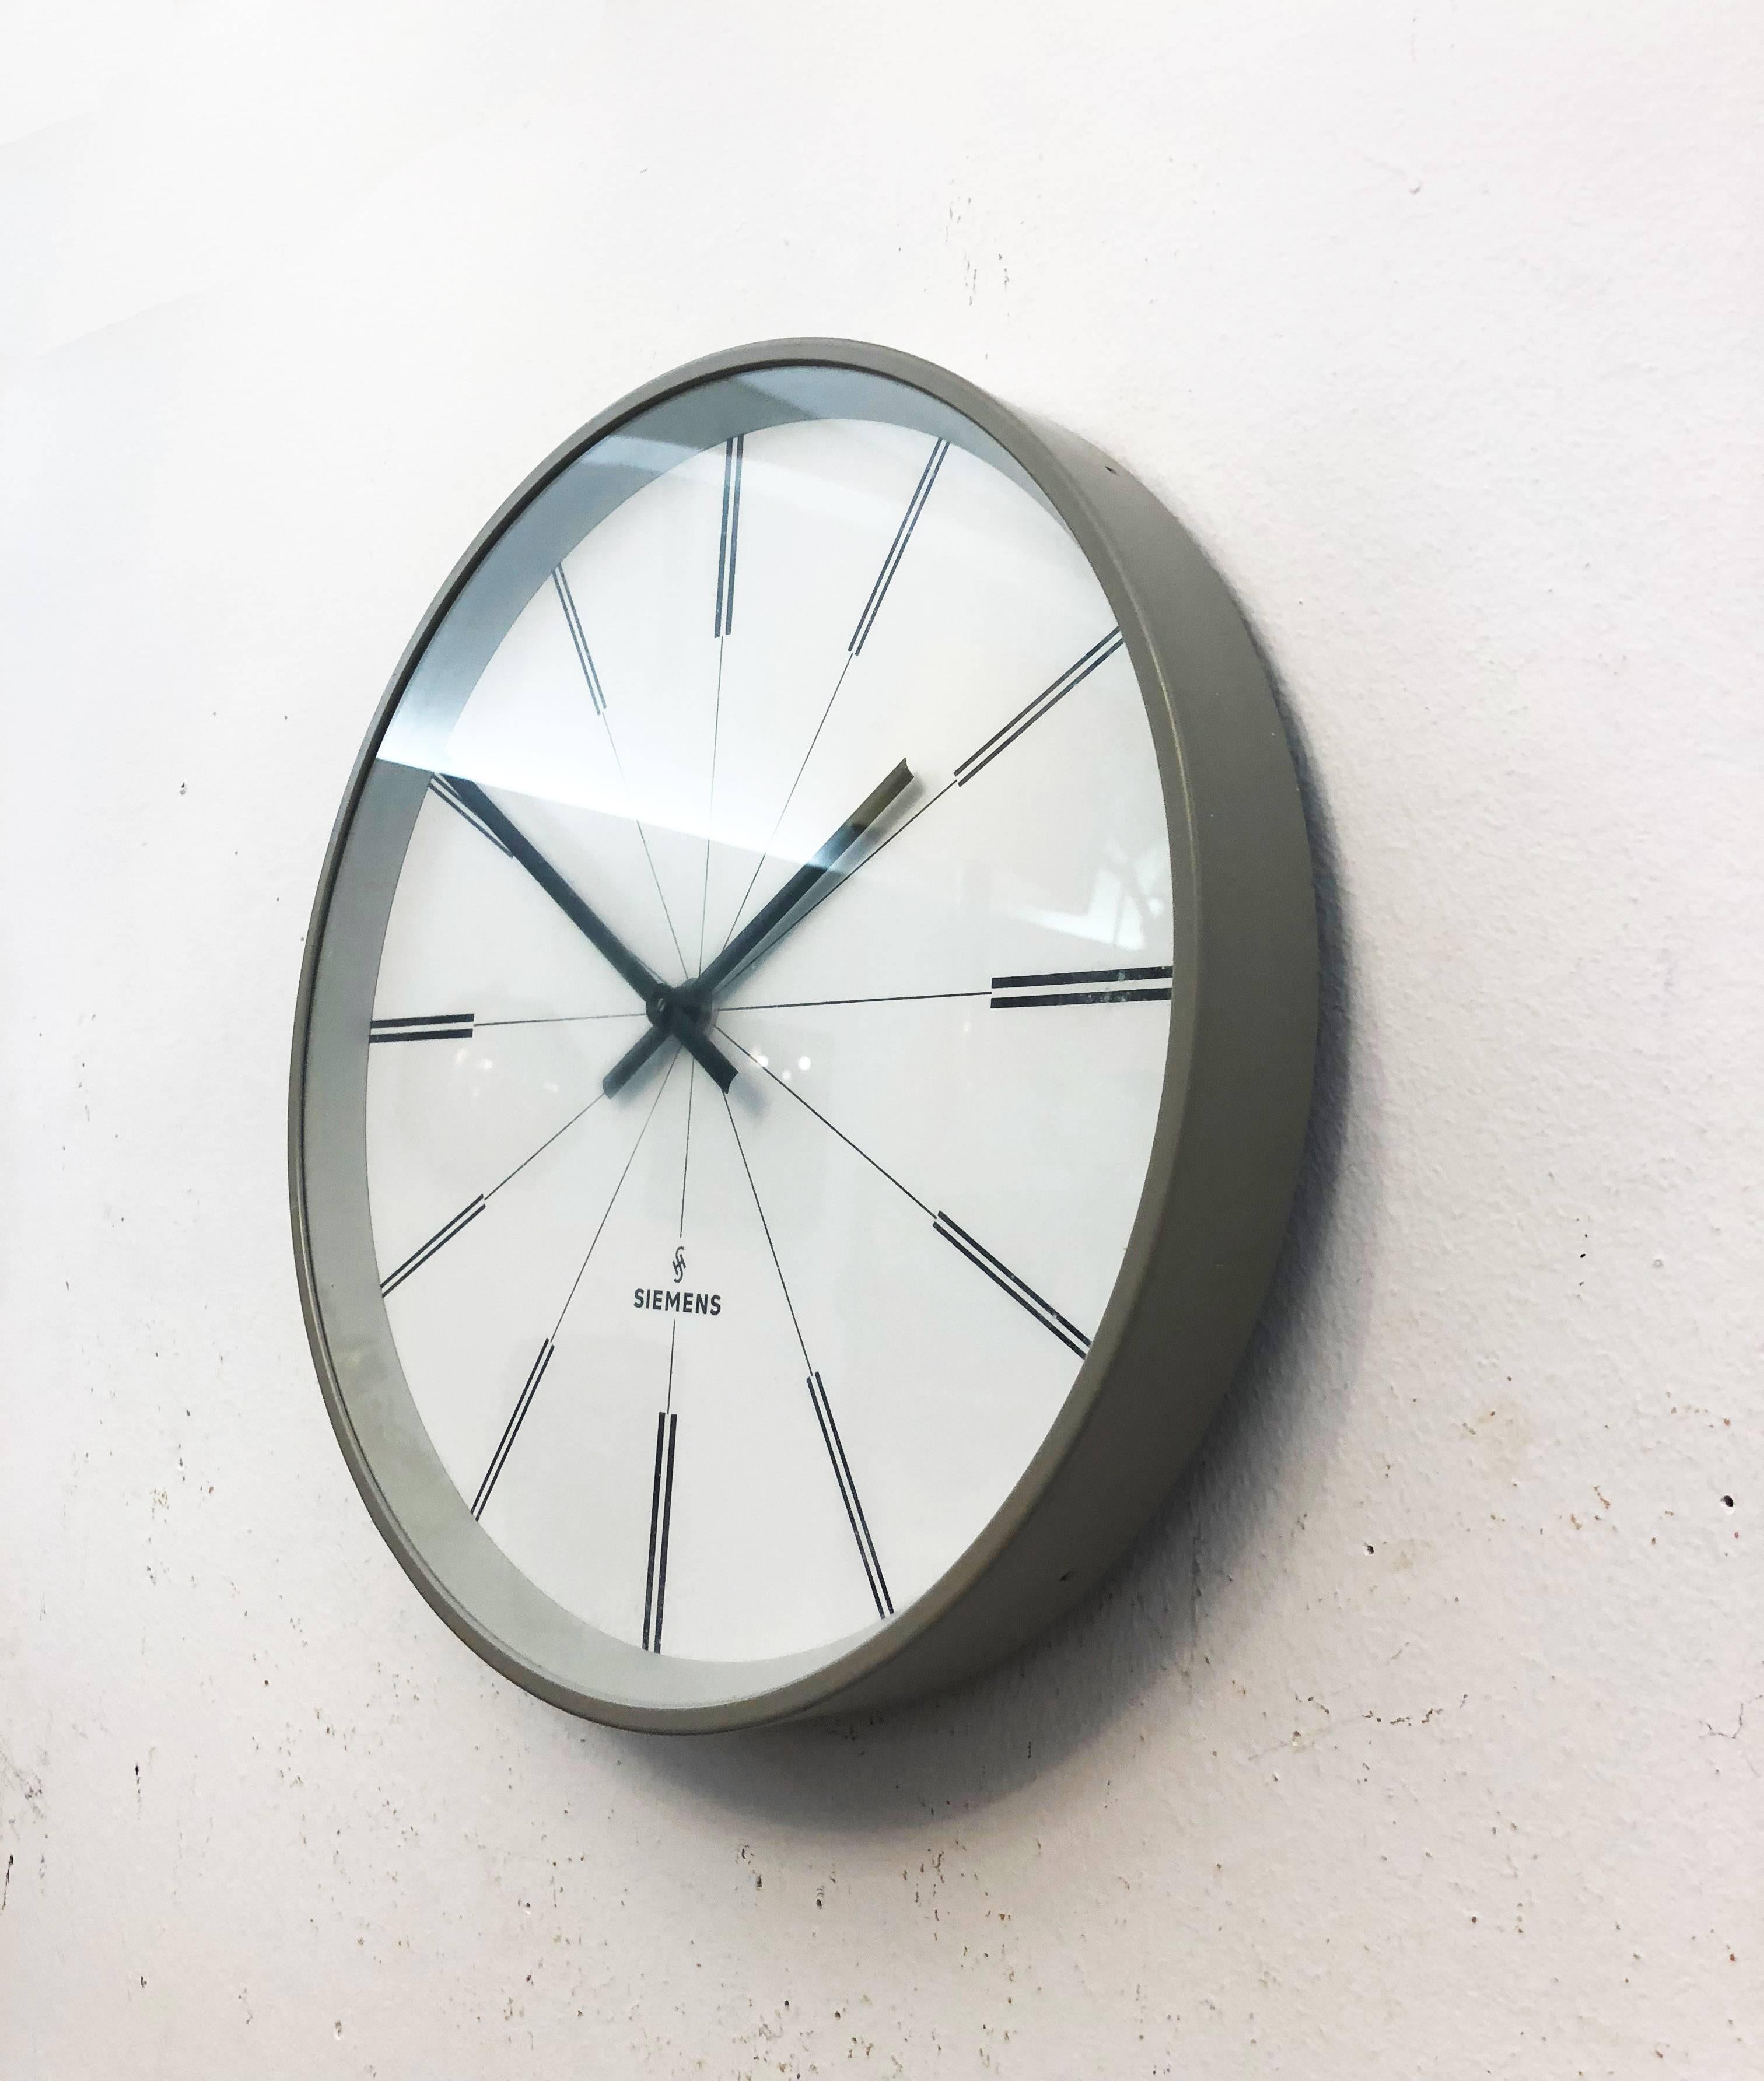 Siemens Industrial Factory or Workshop Wall Clock In Excellent Condition For Sale In Vienna, AT